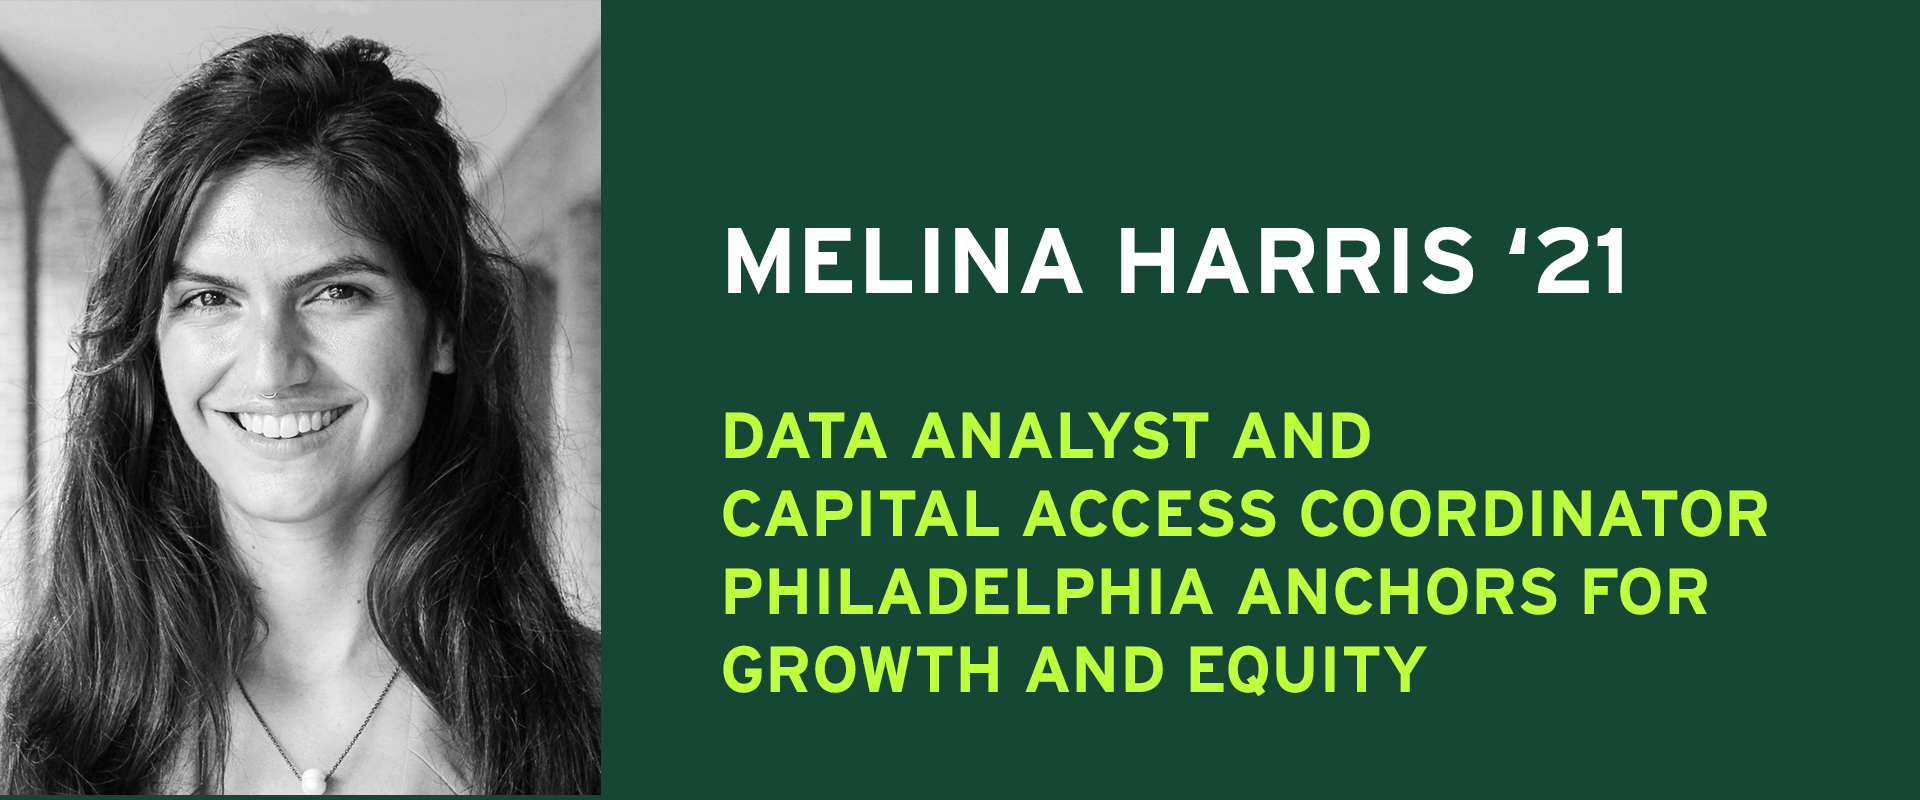 Melina Harris '21 Data Analyst and Capital Access Coordinator Philadelphia Anchors for Growth and Equity